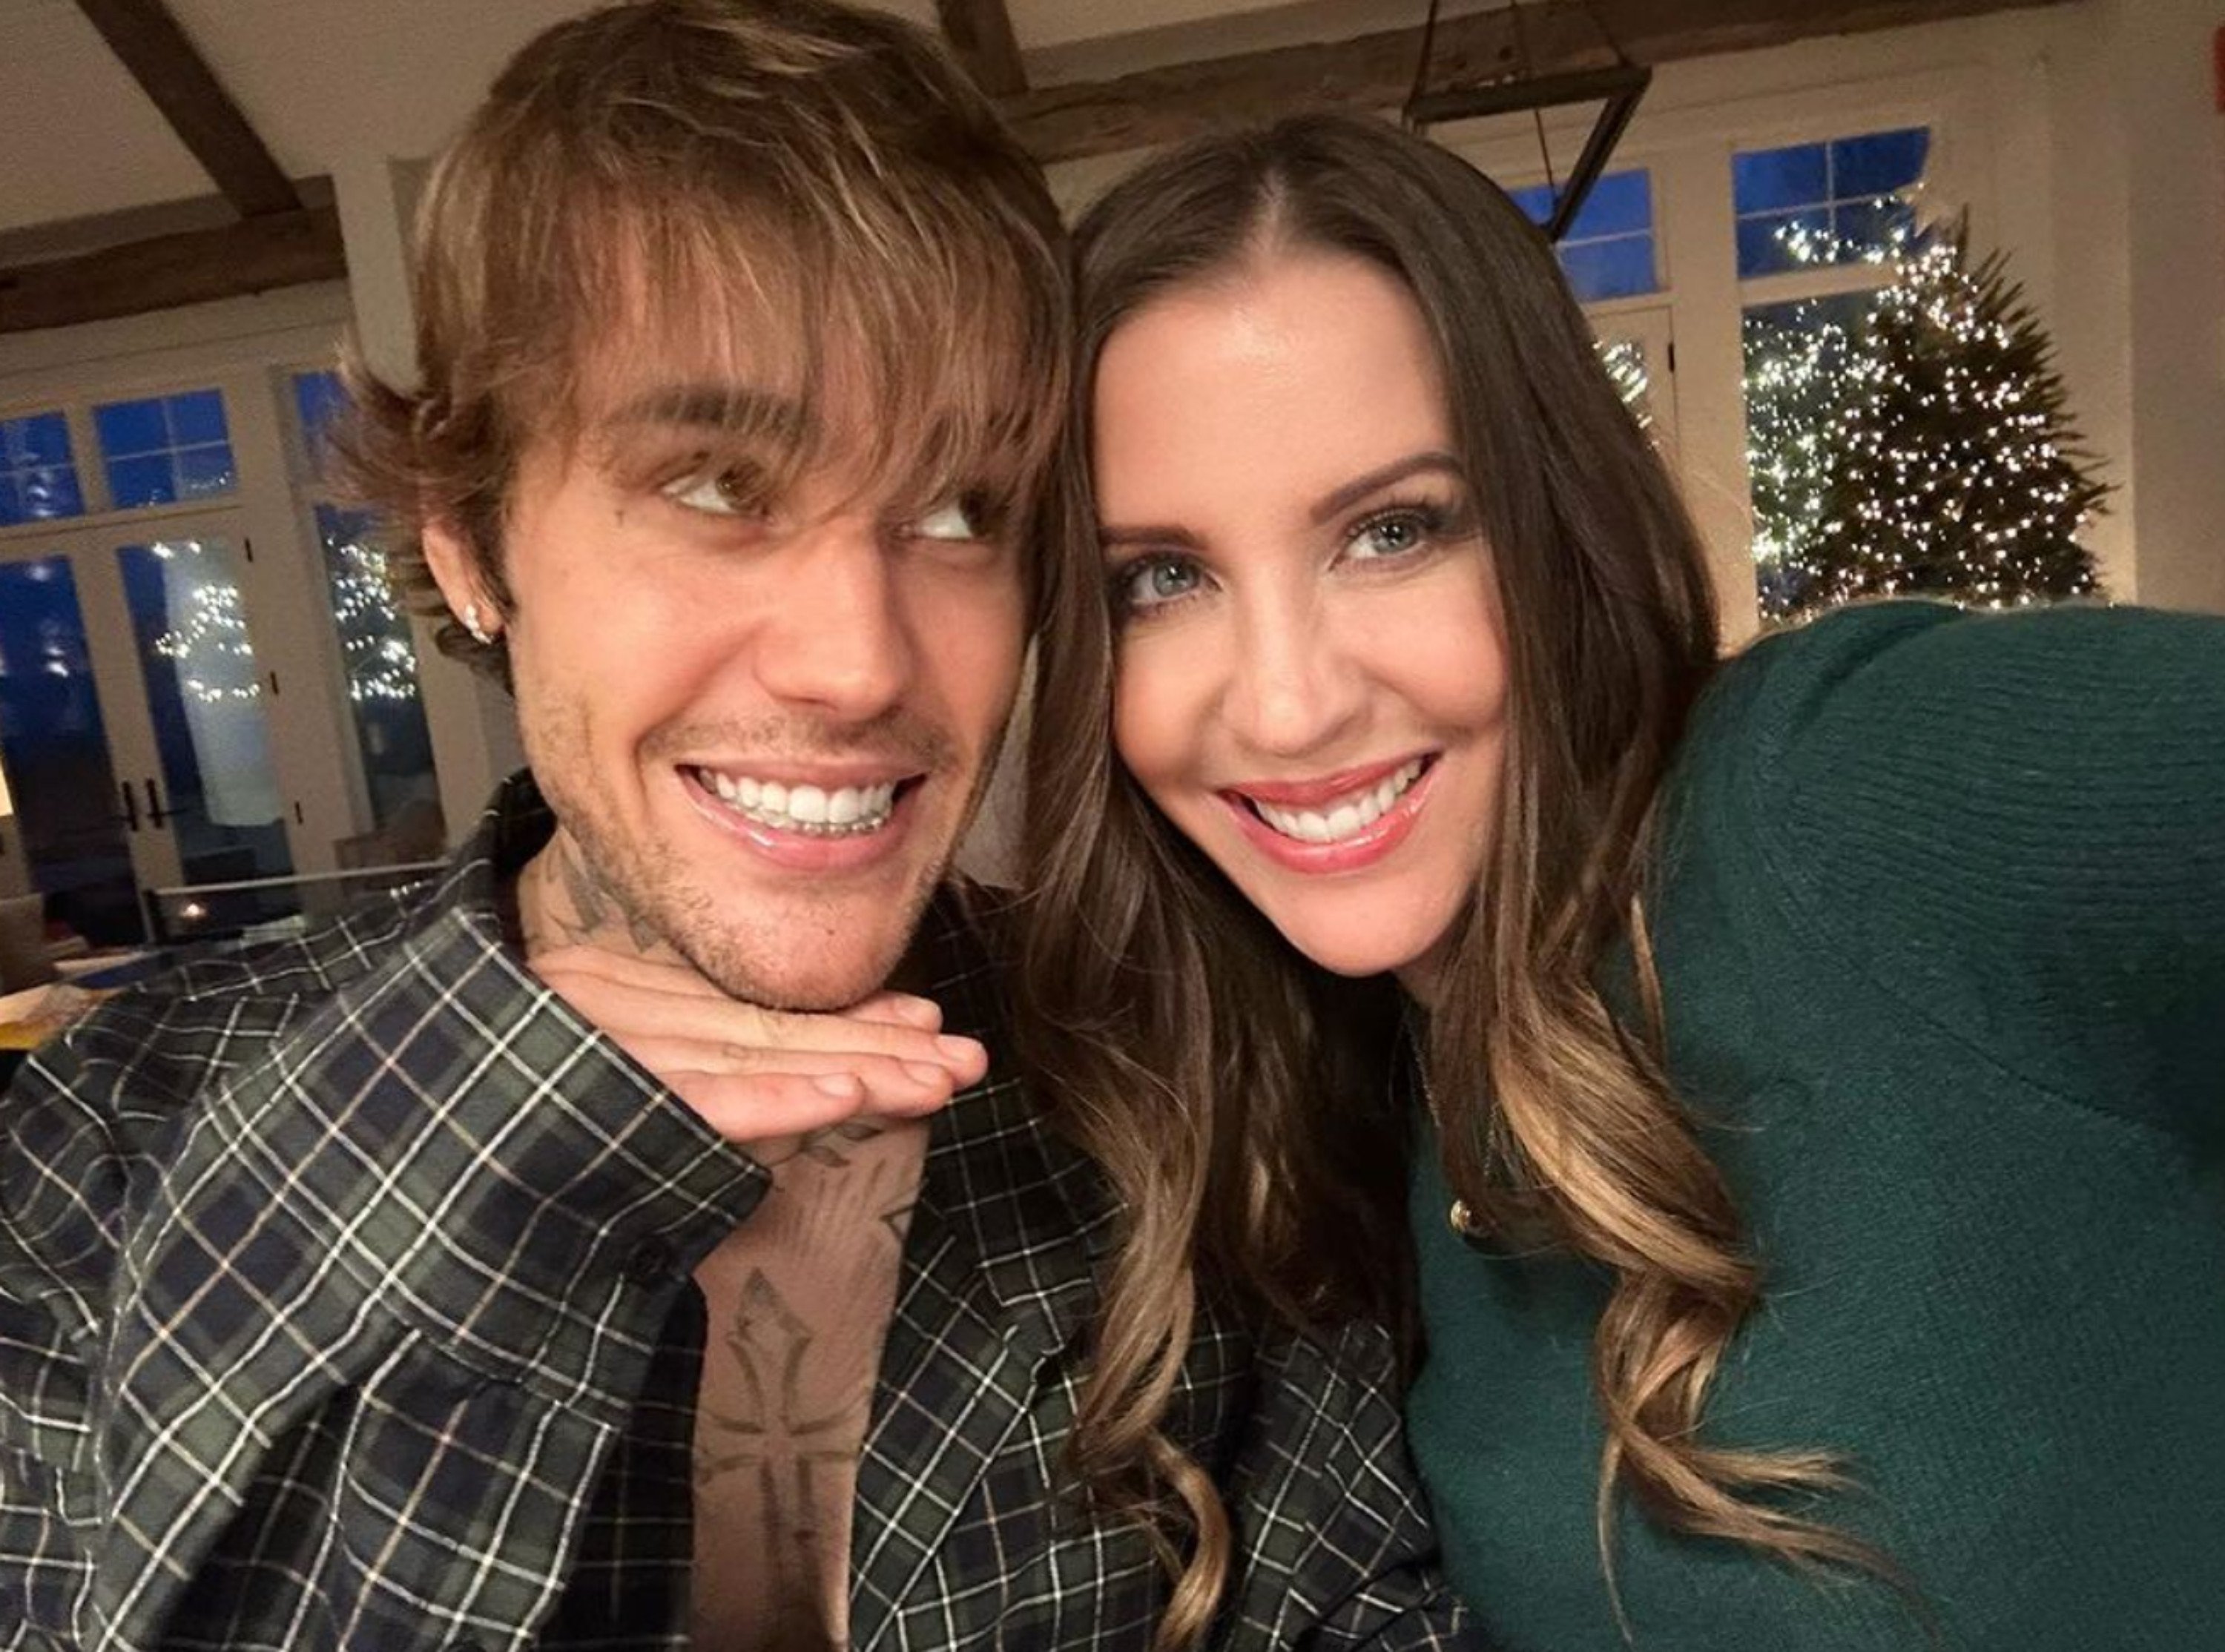 Justin Bieber and his mum Pattie Mallette have had their ups and downs over the years, but seem to be back on track. Photo: @pattiemallette/Instagram 